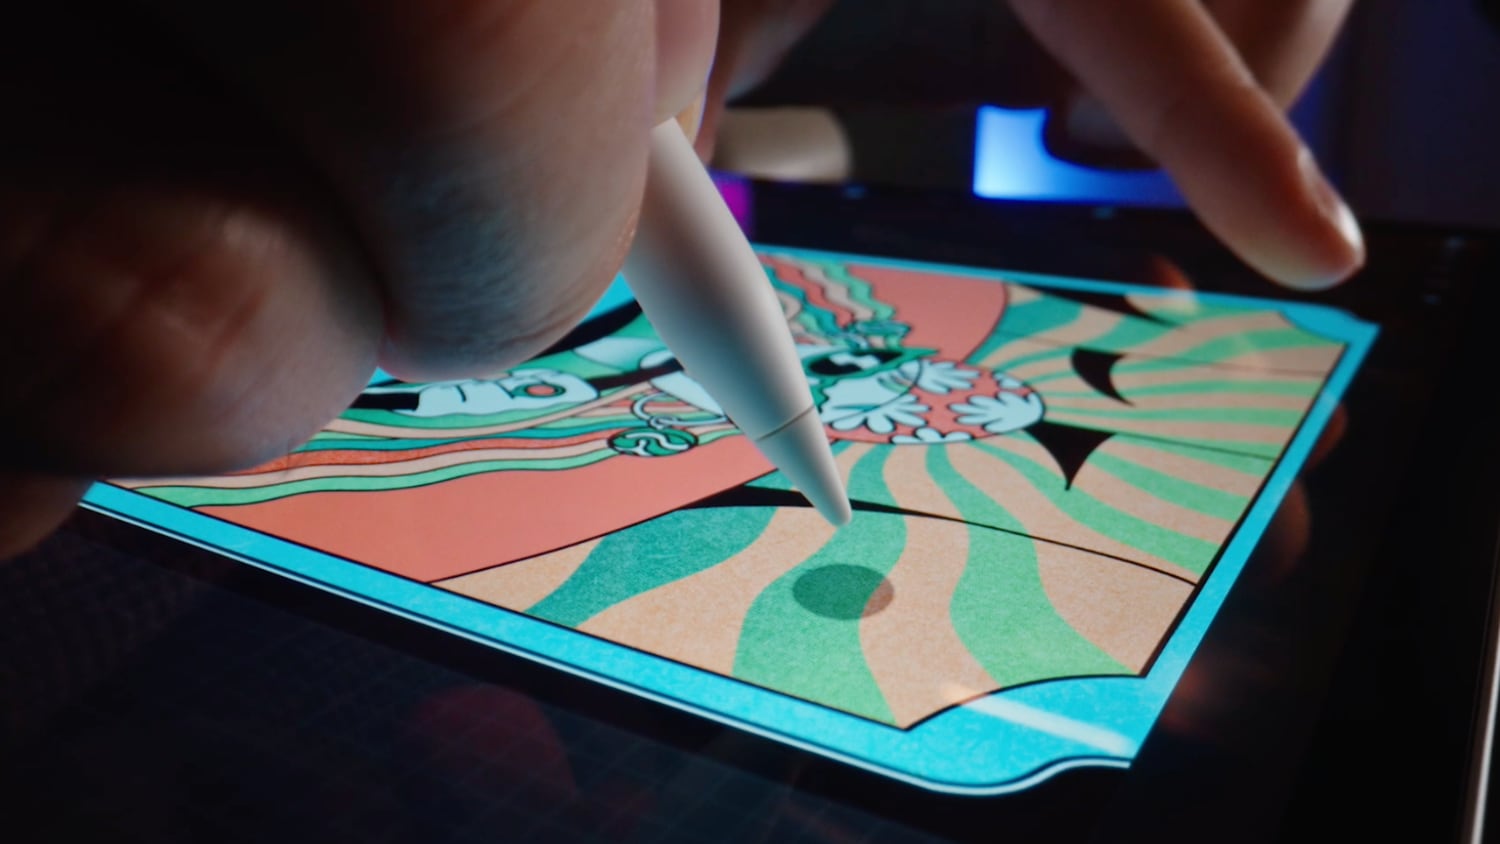 Apple Patents Apple Pencil That Can Sample Colors From Real-World Surfaces